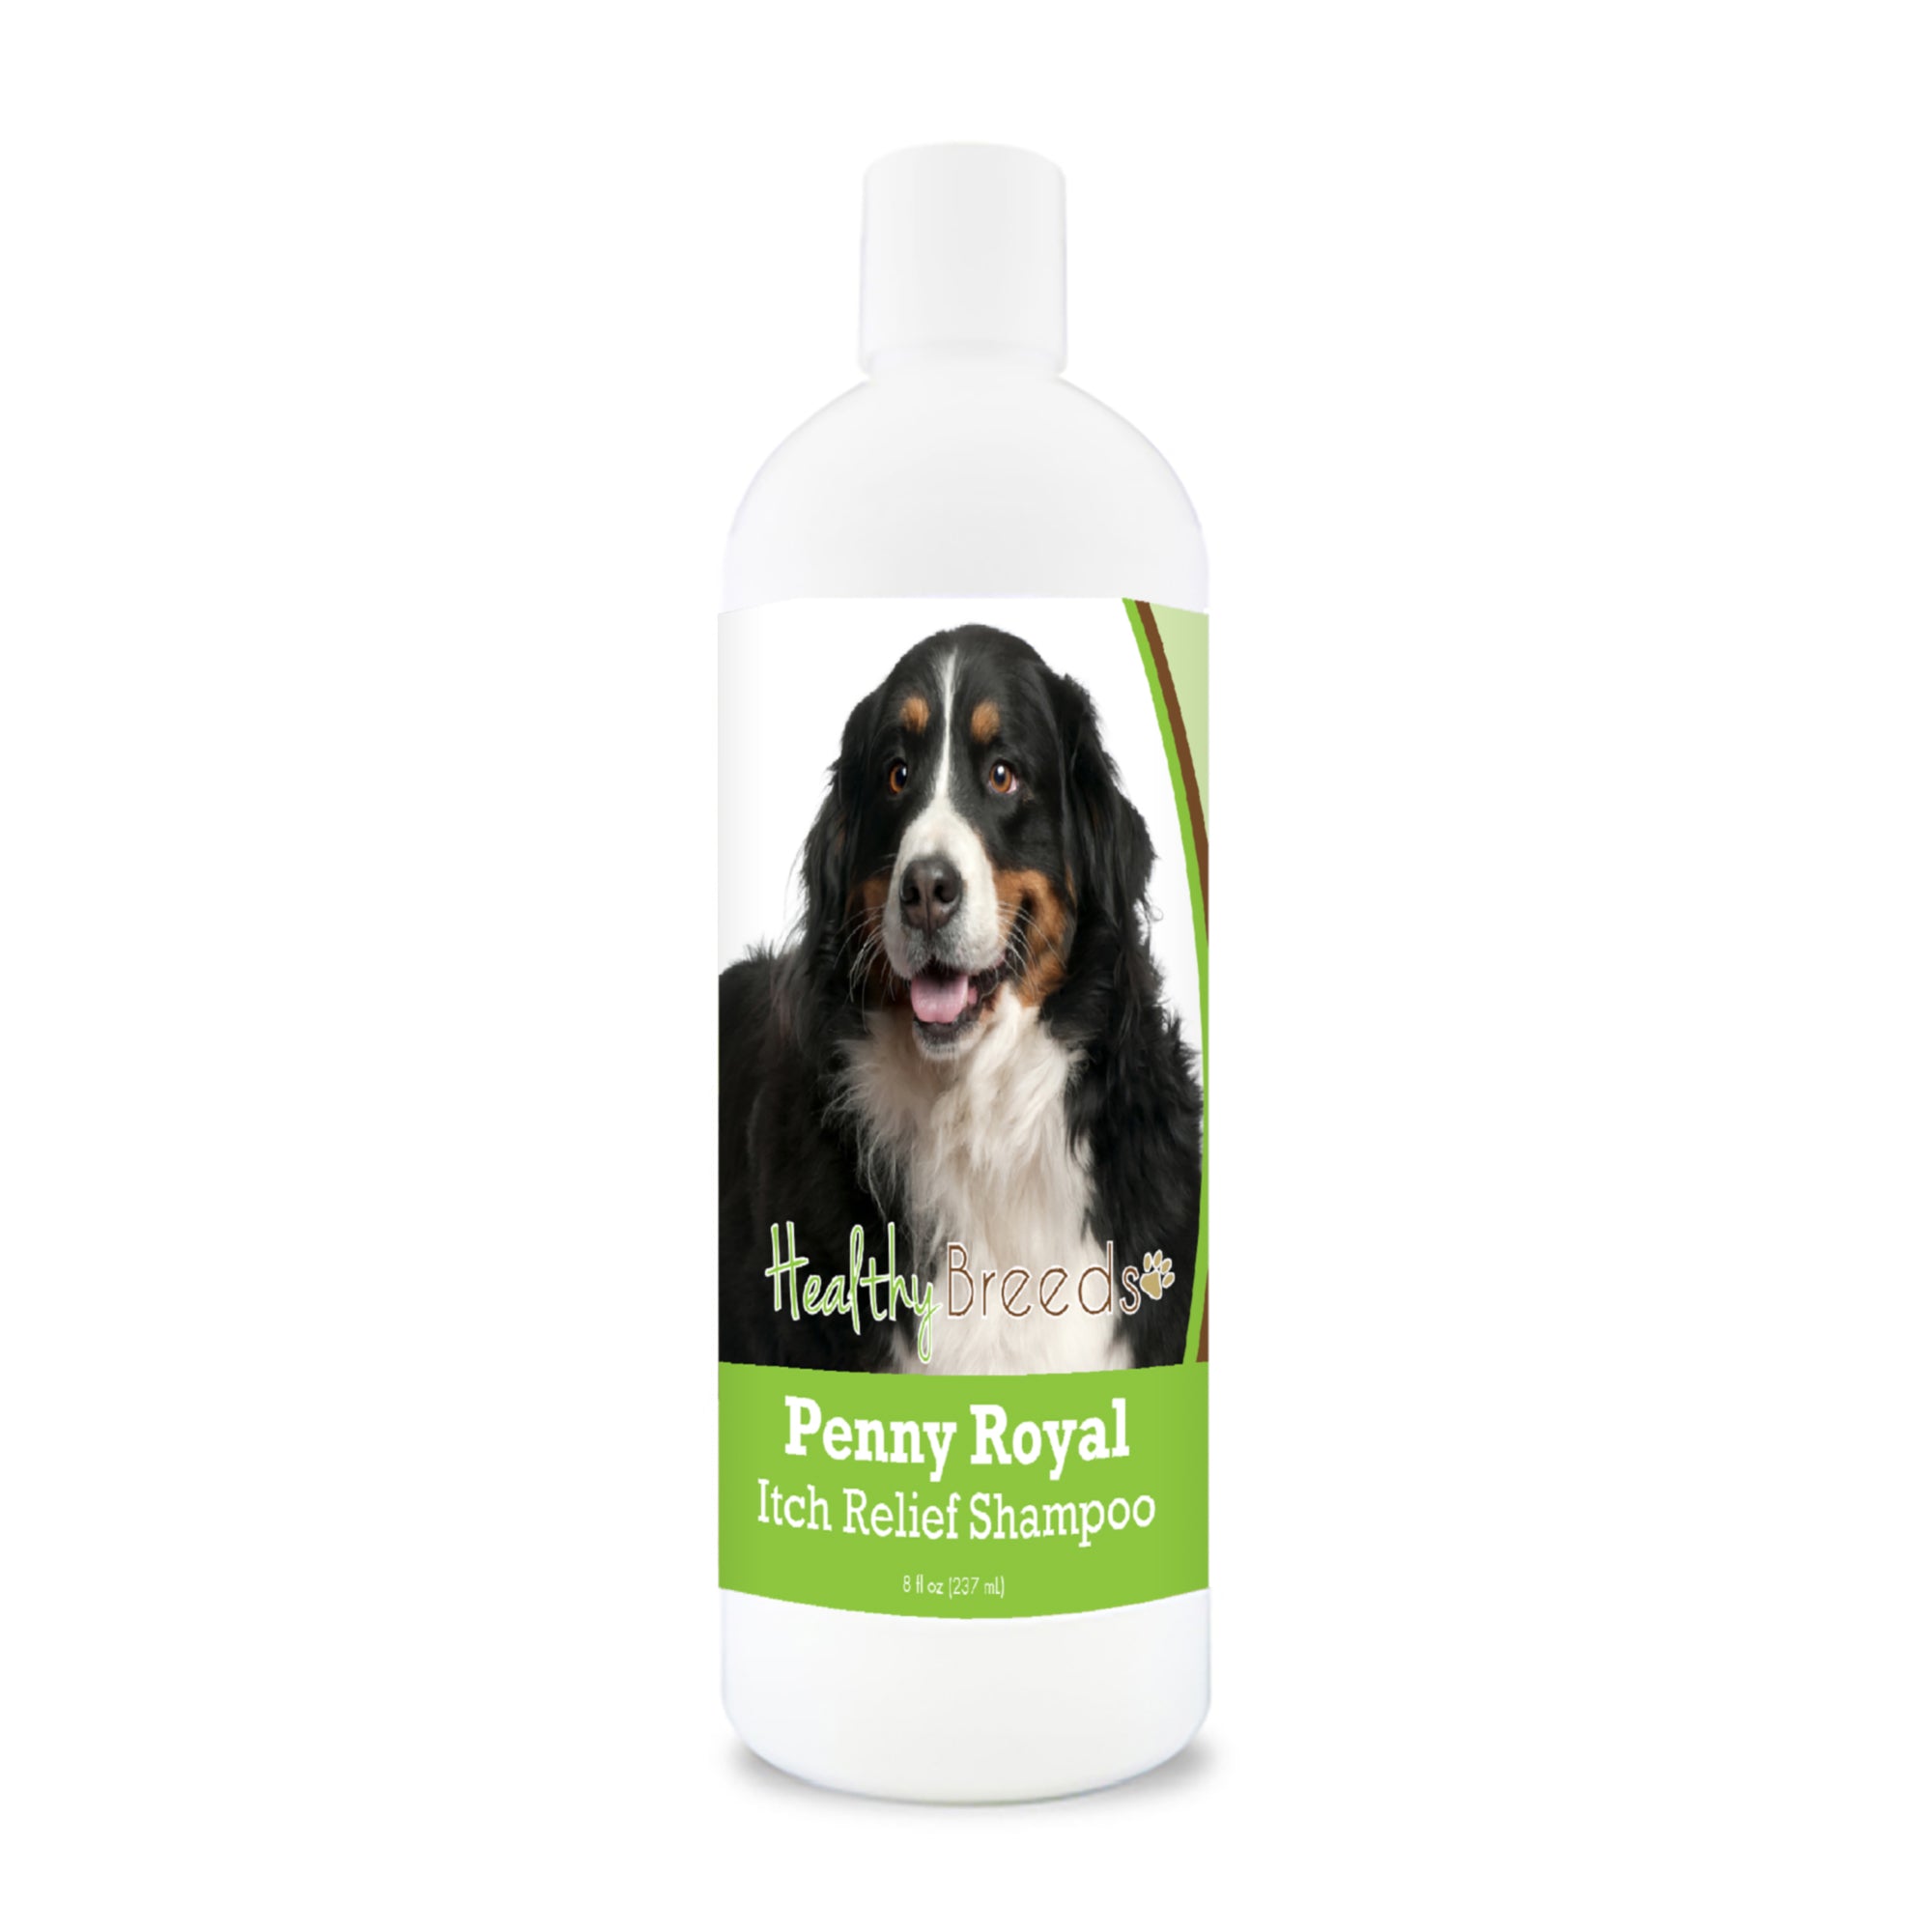 Bernese Mountain Dog Penny Royal Itch Relief Shampoo 8 oz